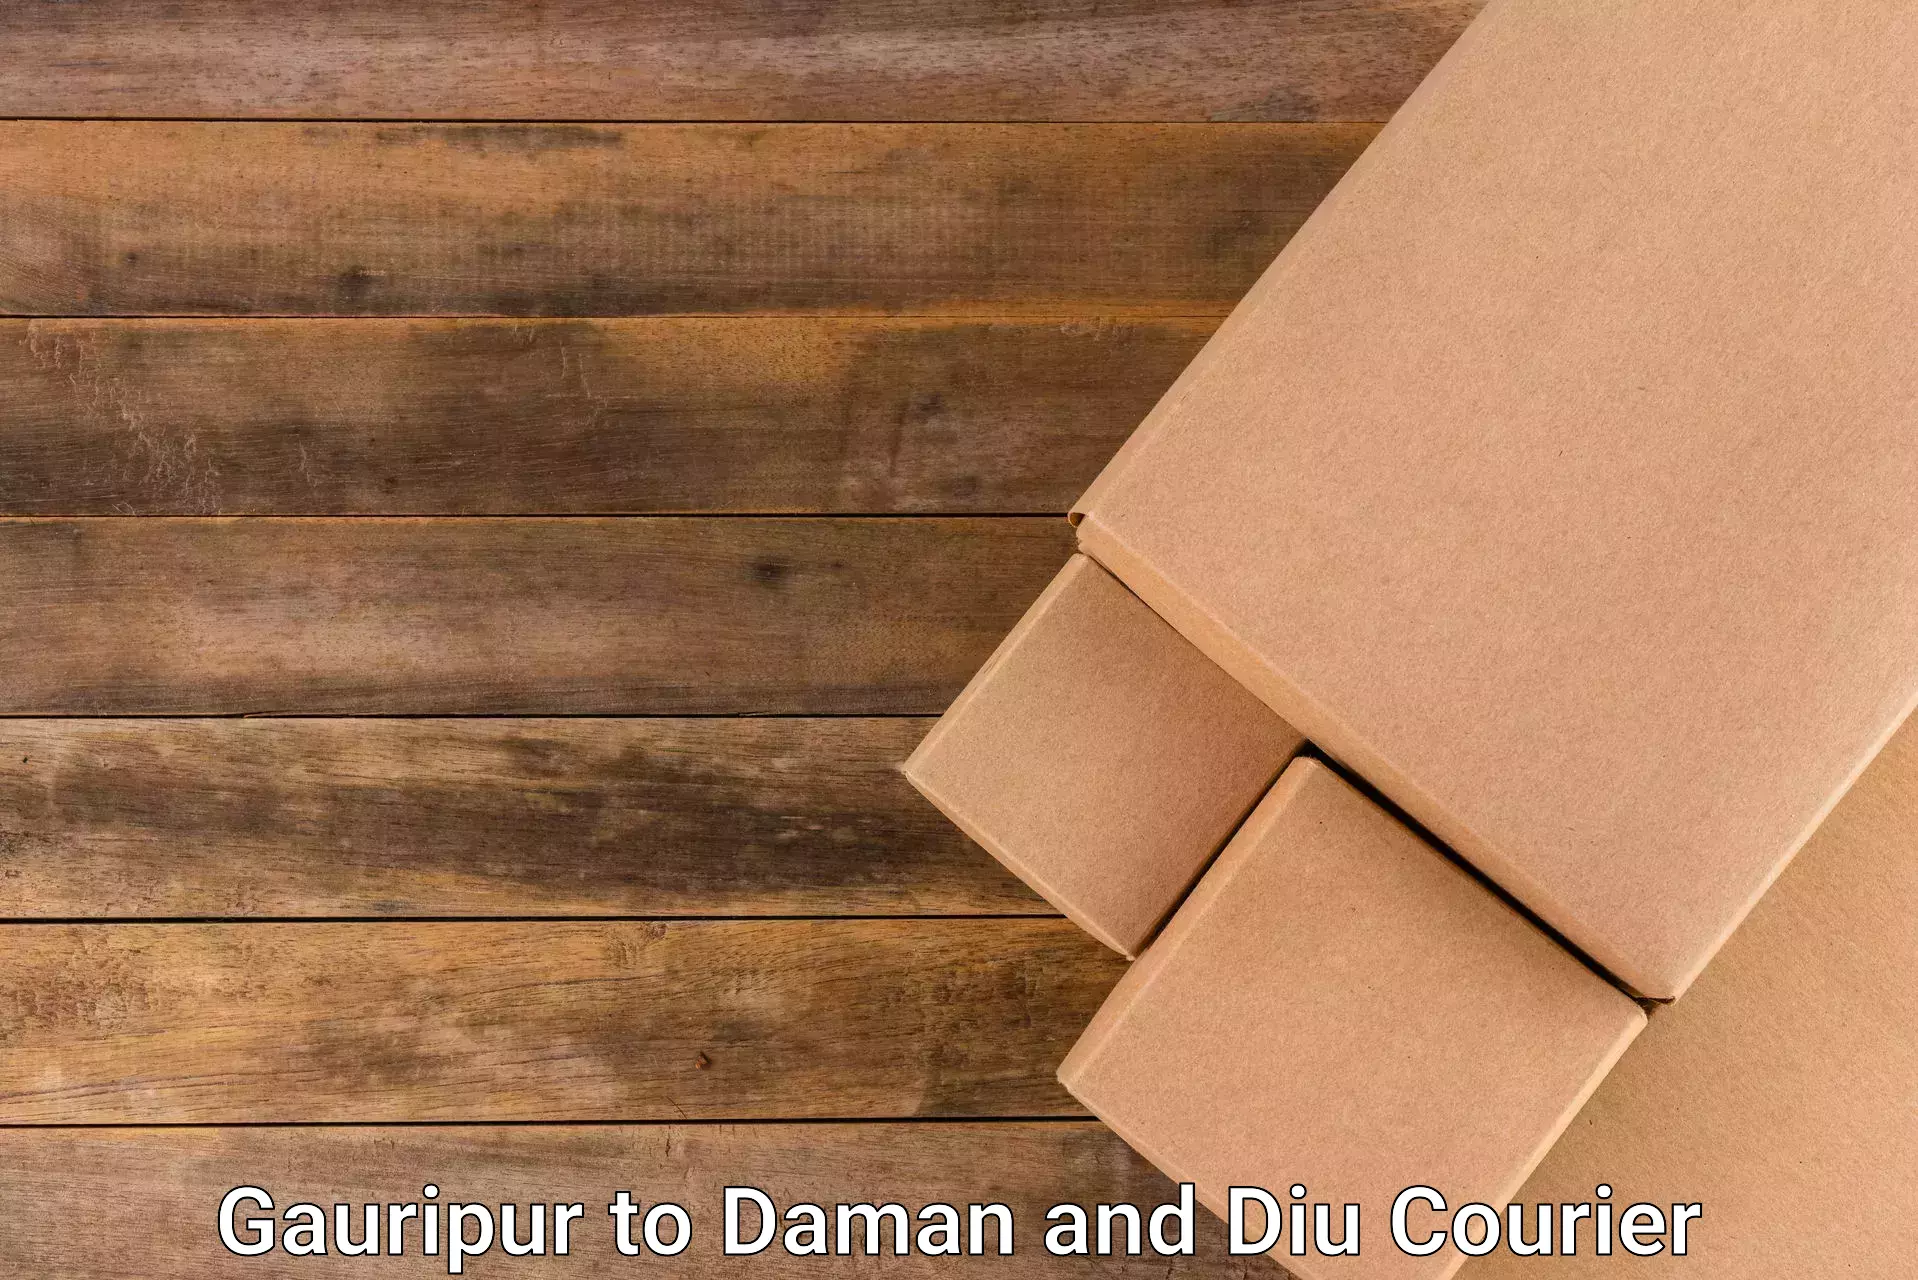 Diverse delivery methods Gauripur to Daman and Diu